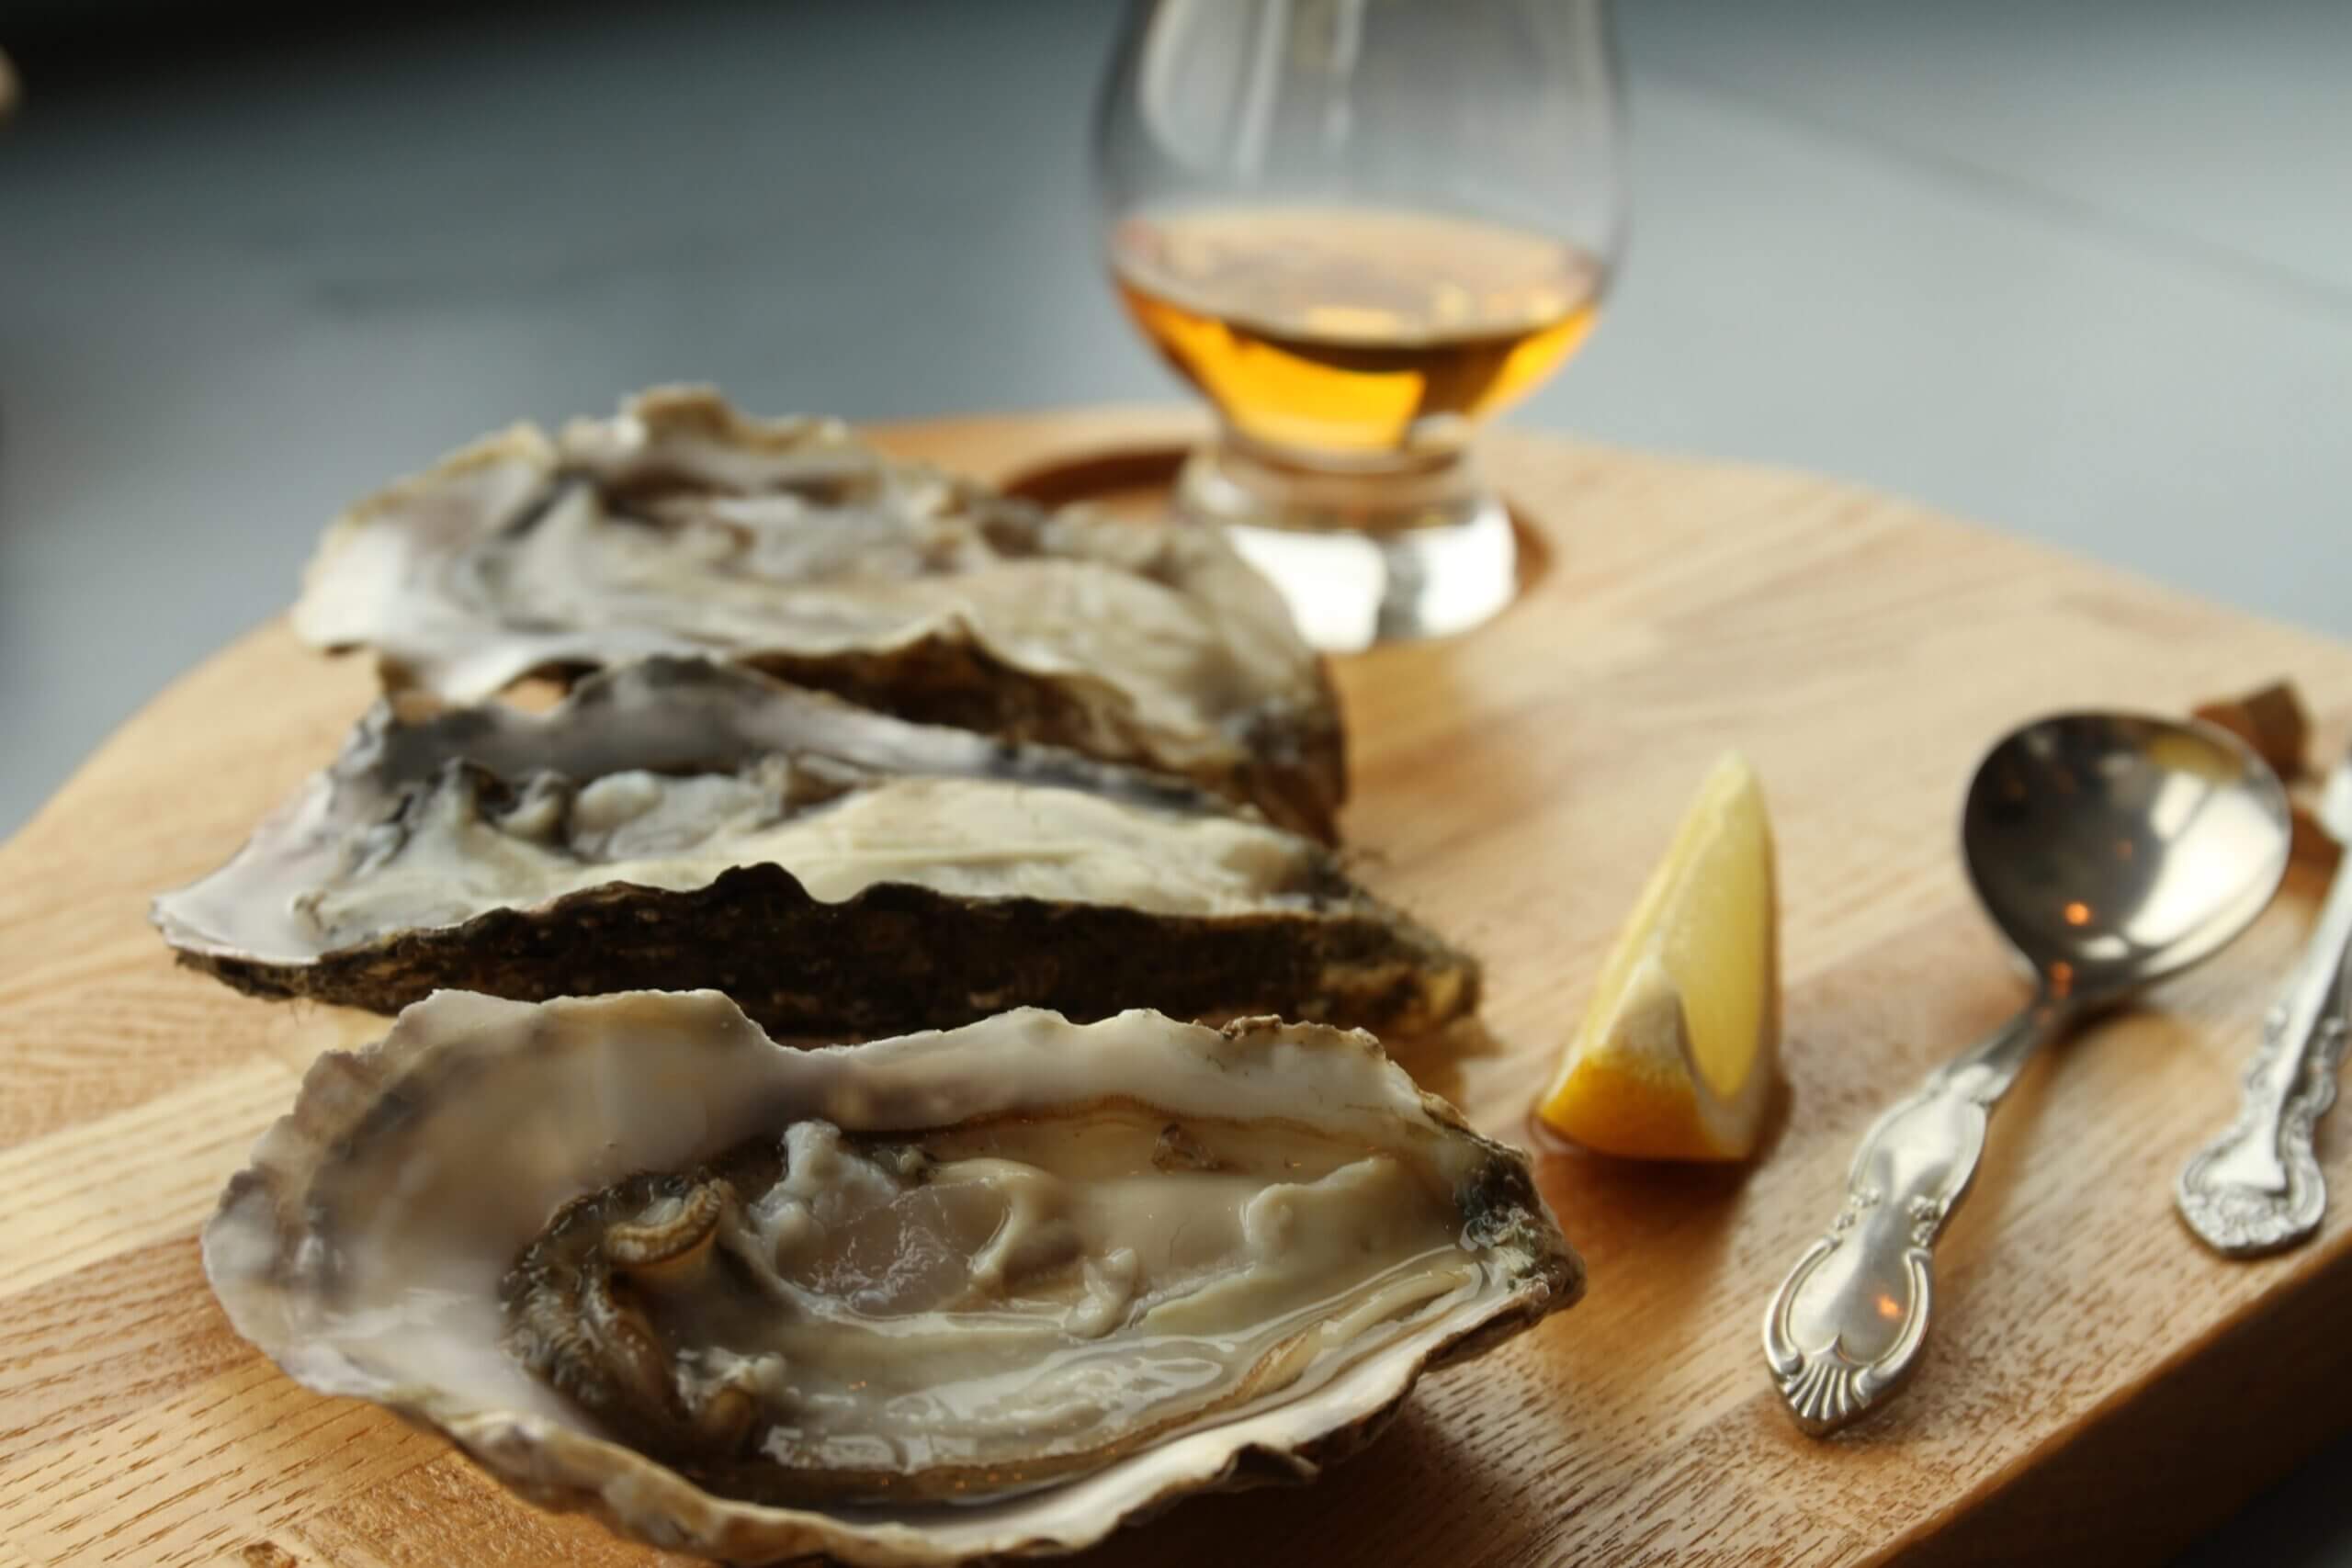 Pair Whiskey and Fresh Oysters at The Akkeshi Gourmet Park “Conchiglie”